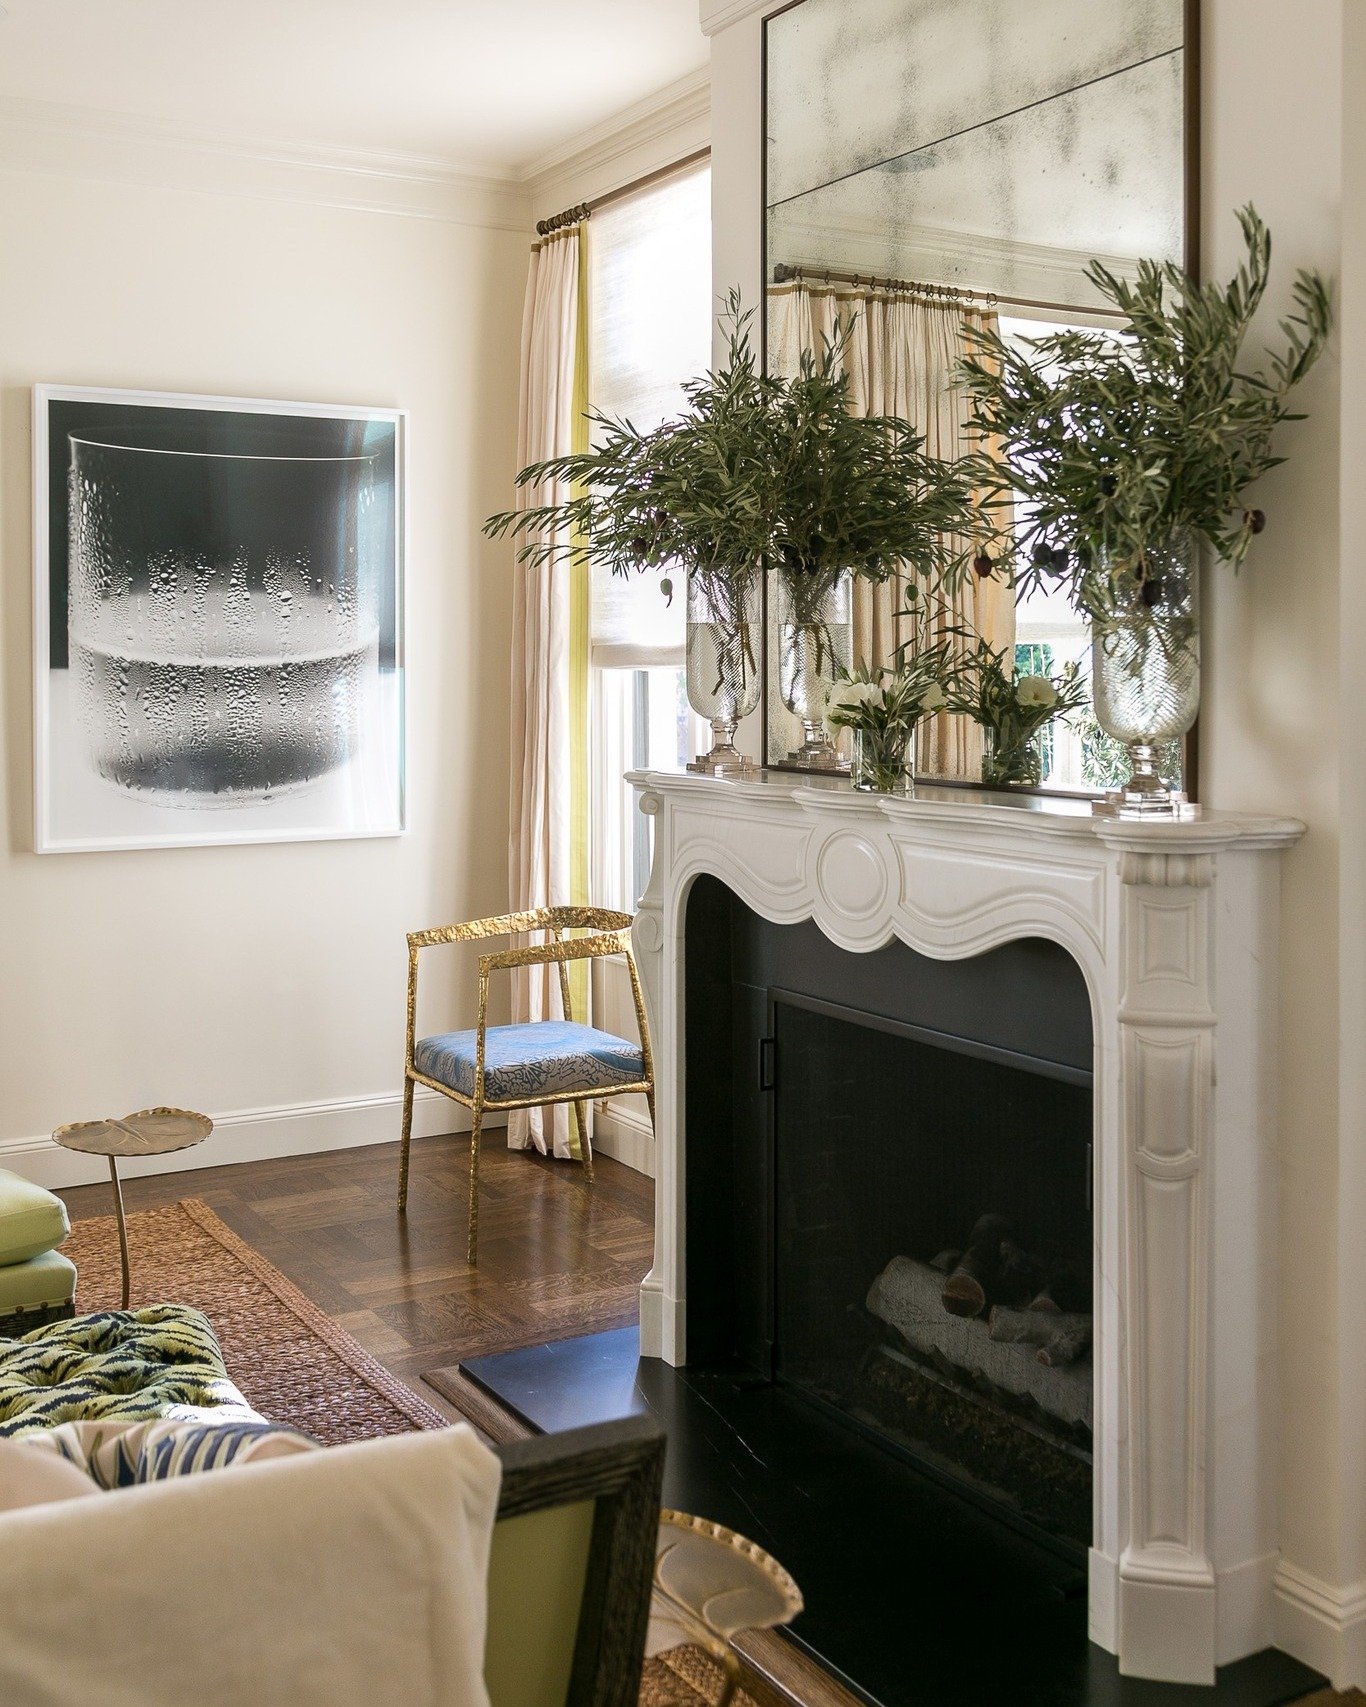 Antique and Modern compliment perfectly in this SF home | design by @josephine_fisher_interiors 
#interiordesignphotography #interiordesignphotographer #bayareainteriordesign #bayareainteriordesigner #sanfranciscointeriordesign #sanfranciscointeriord